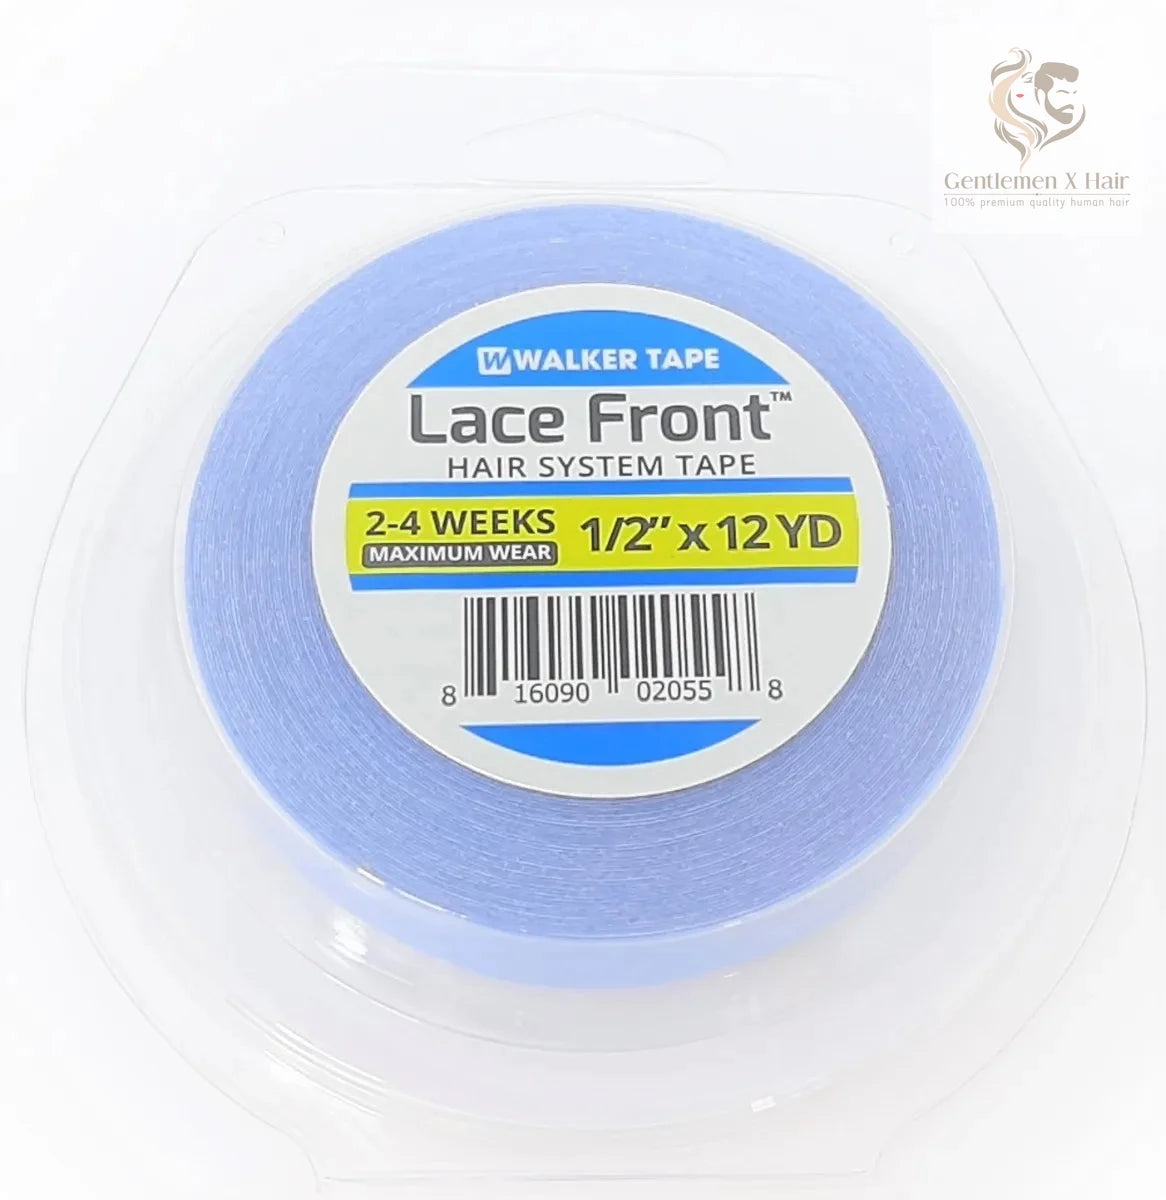 LACE FRONT SUPPORT TAPE ROLLS A Maximum Wear favorite